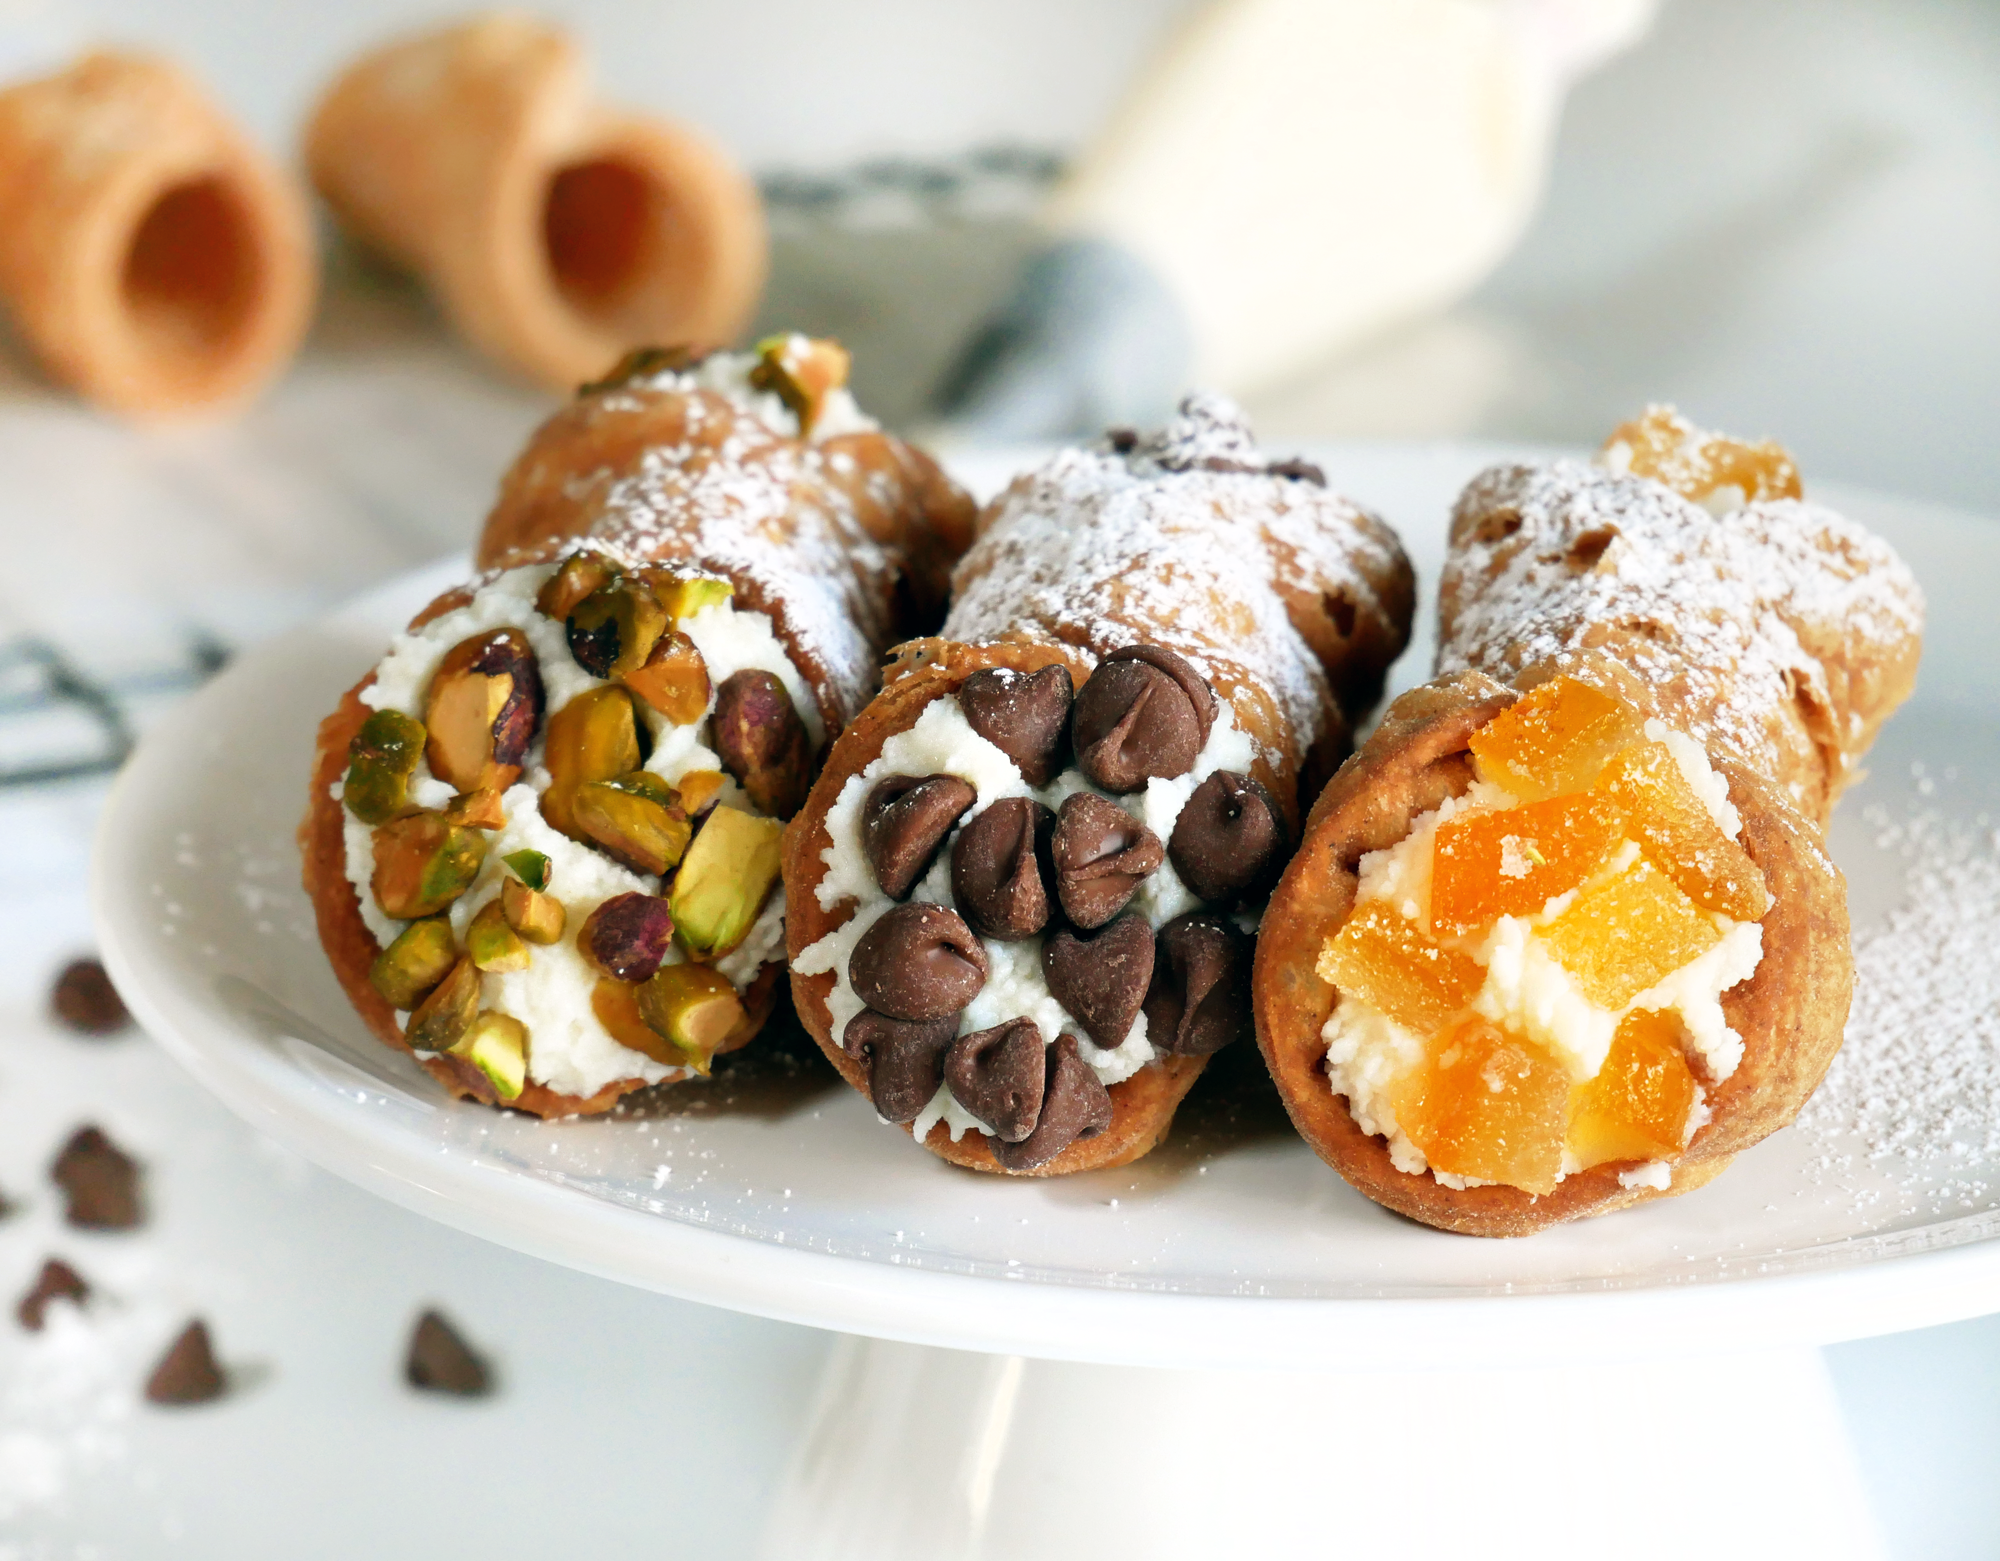 authentic cannoli recipe from siciliy, italy - the history of the cannoli